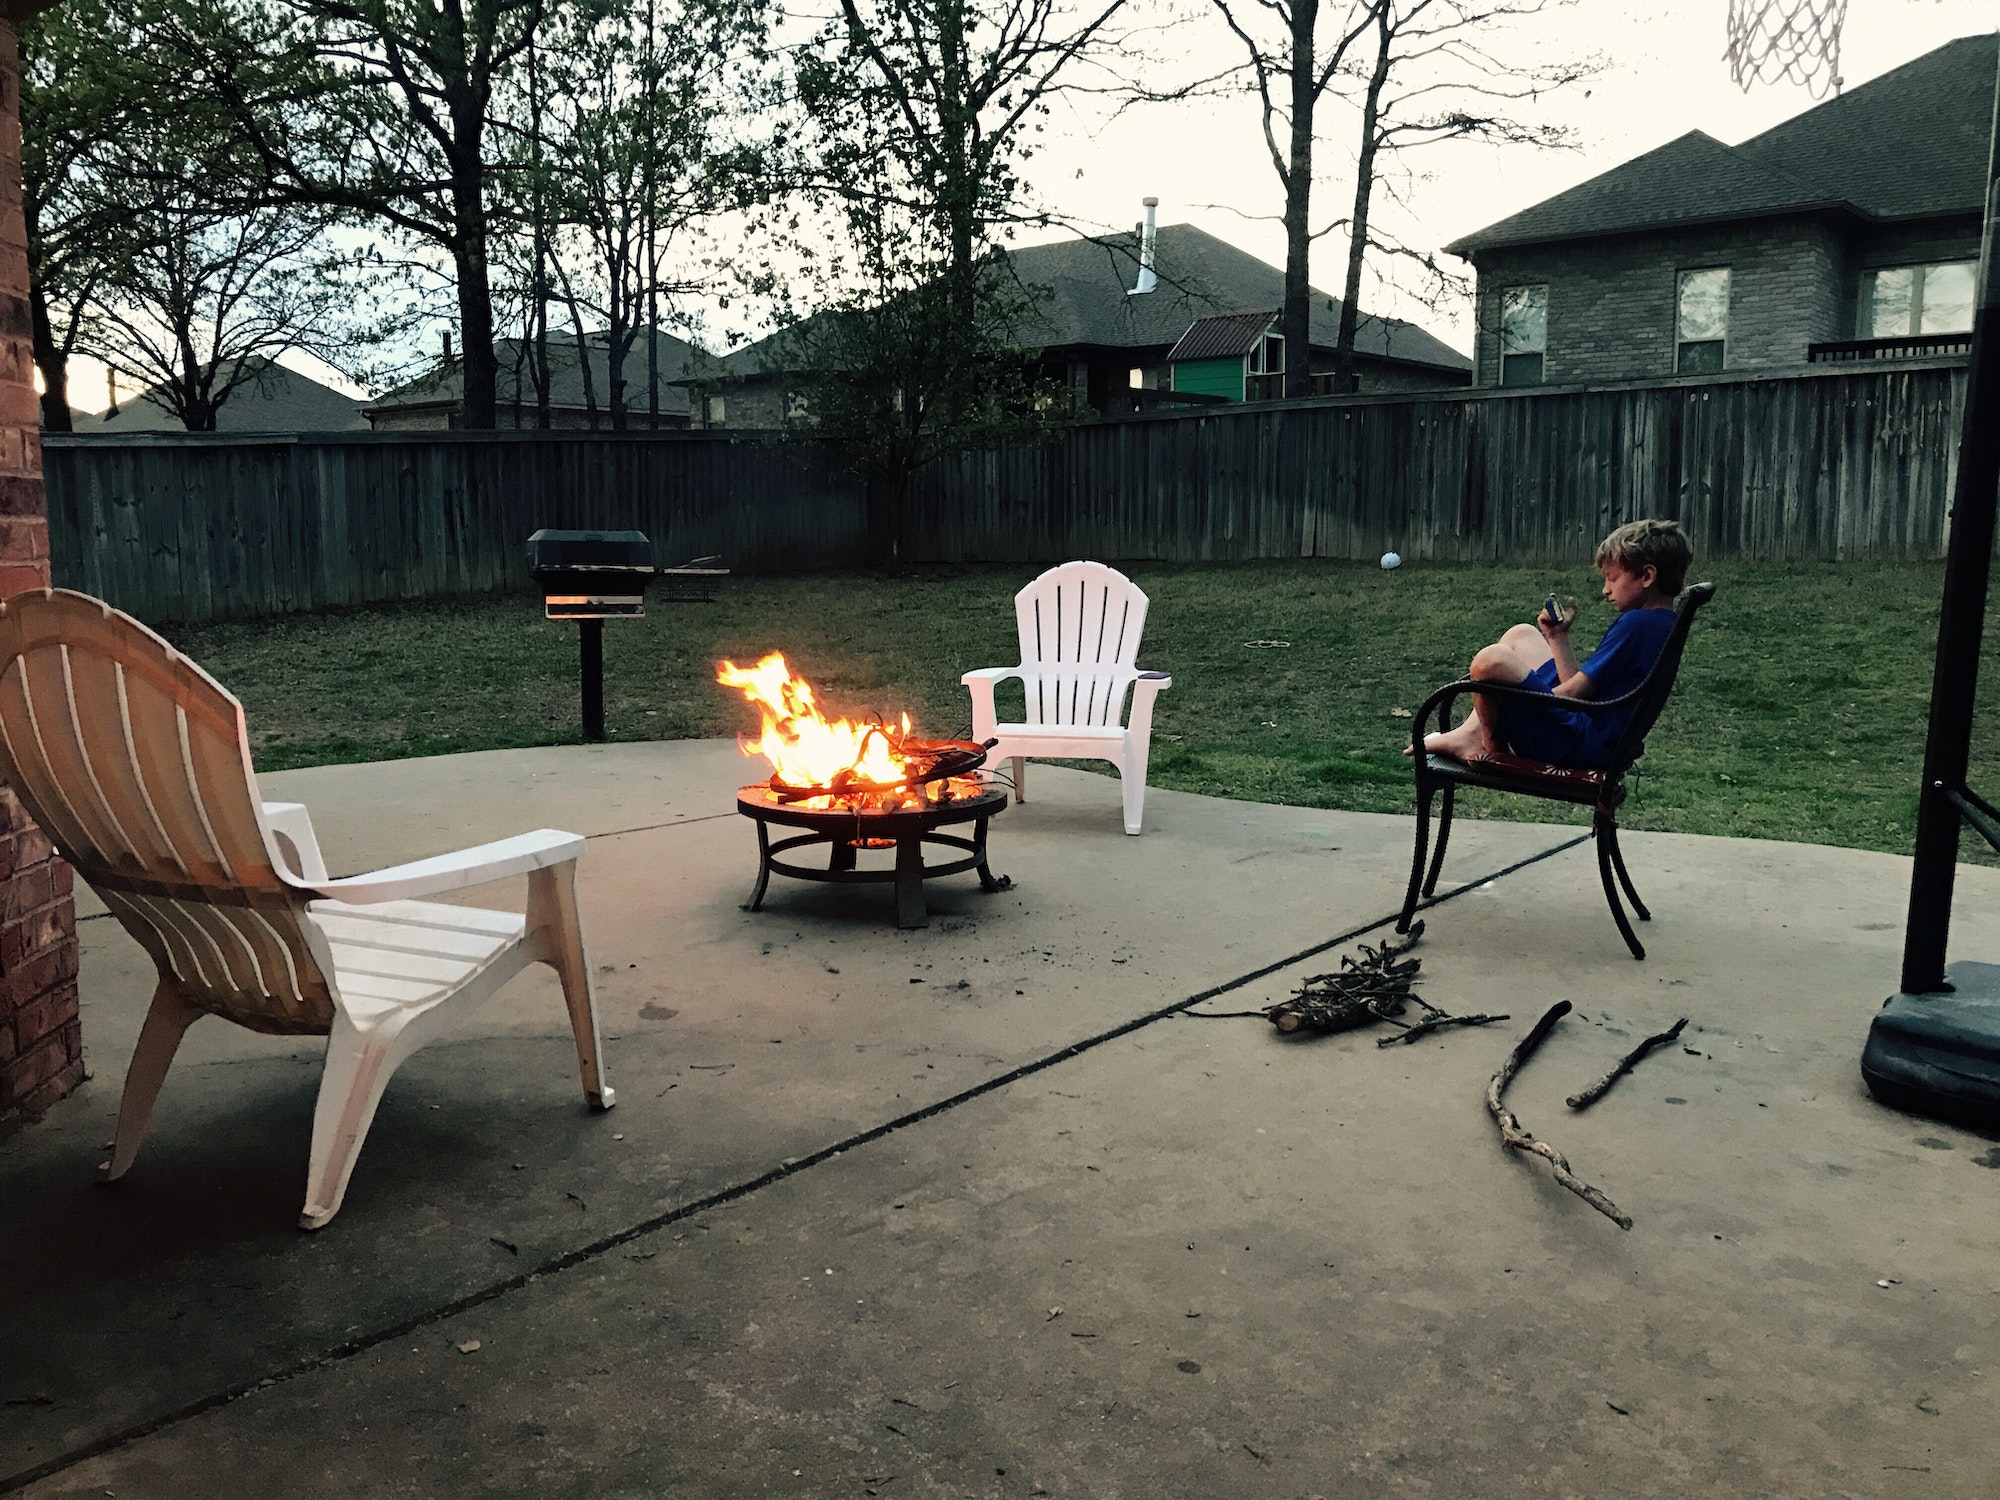 Fire pit with friends